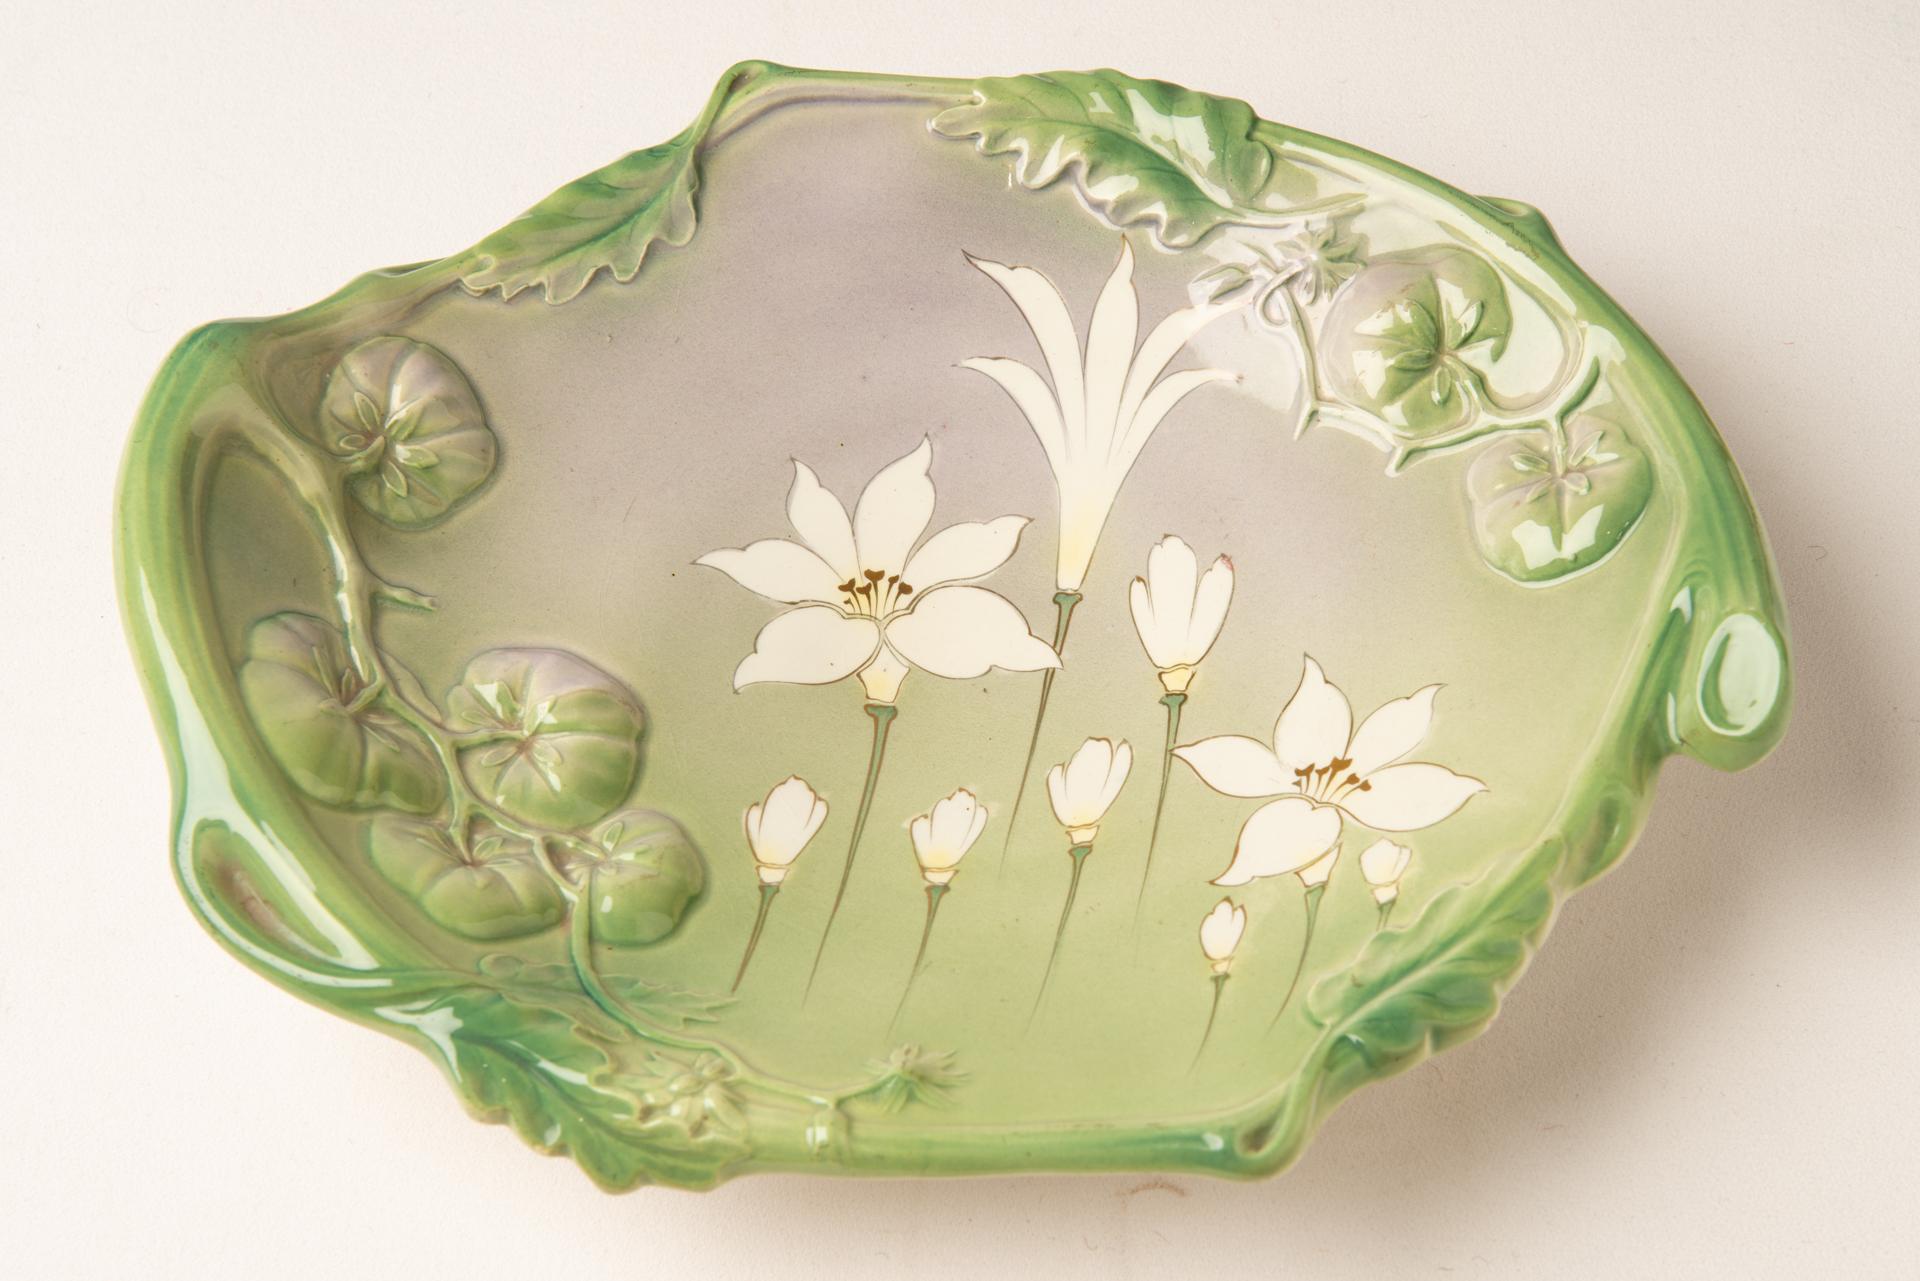 French Art Nouveau Period Ceramic Plate with Leaves in Relief For Sale